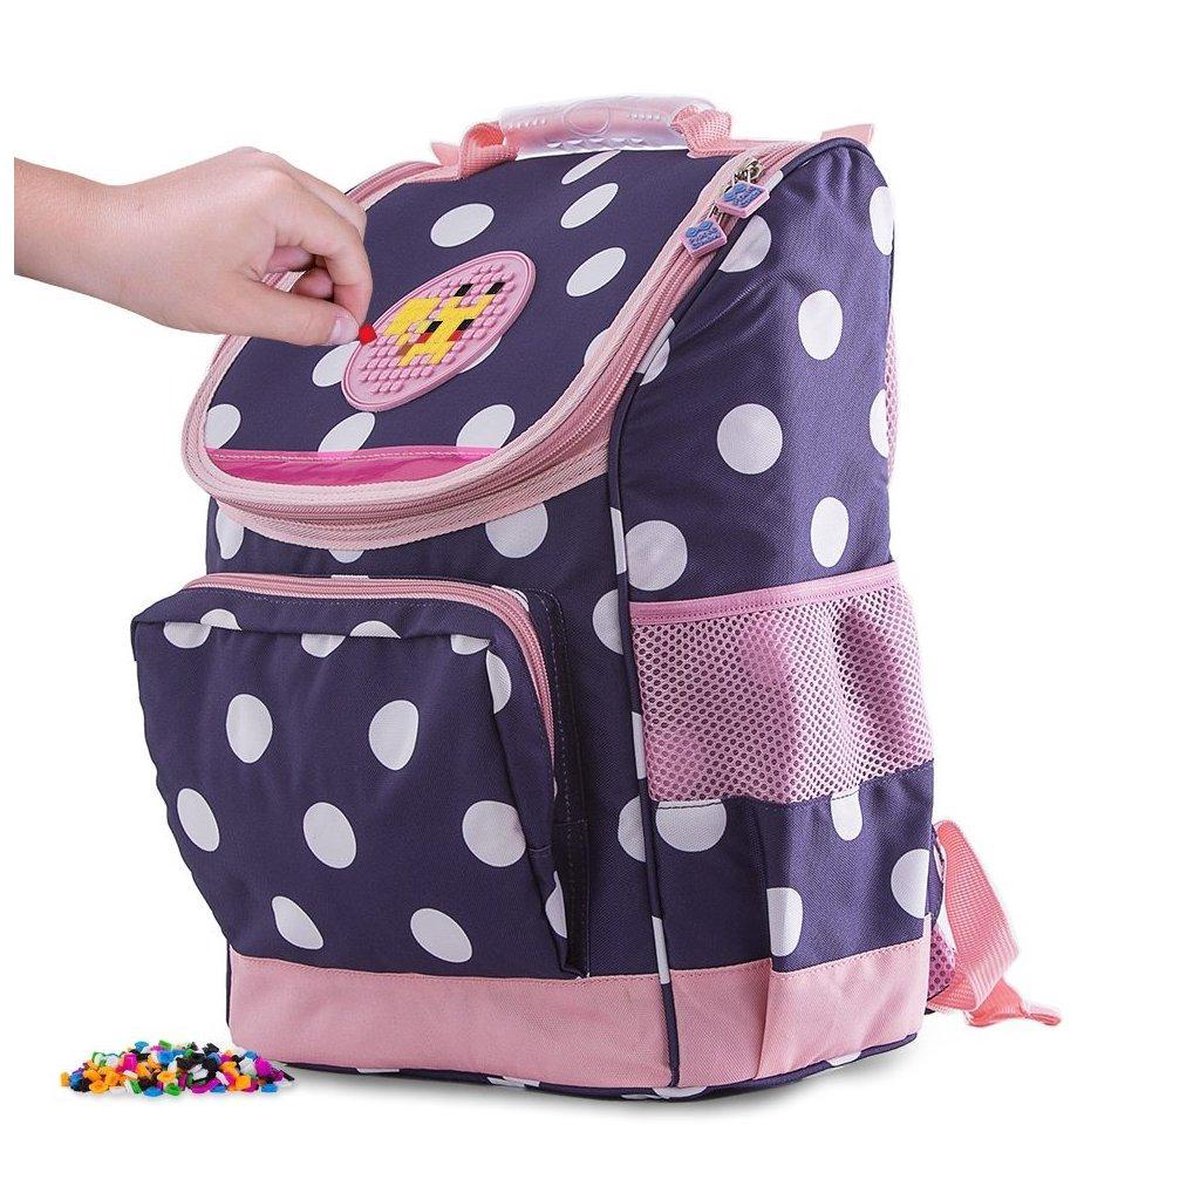 Pixie Dots backpack